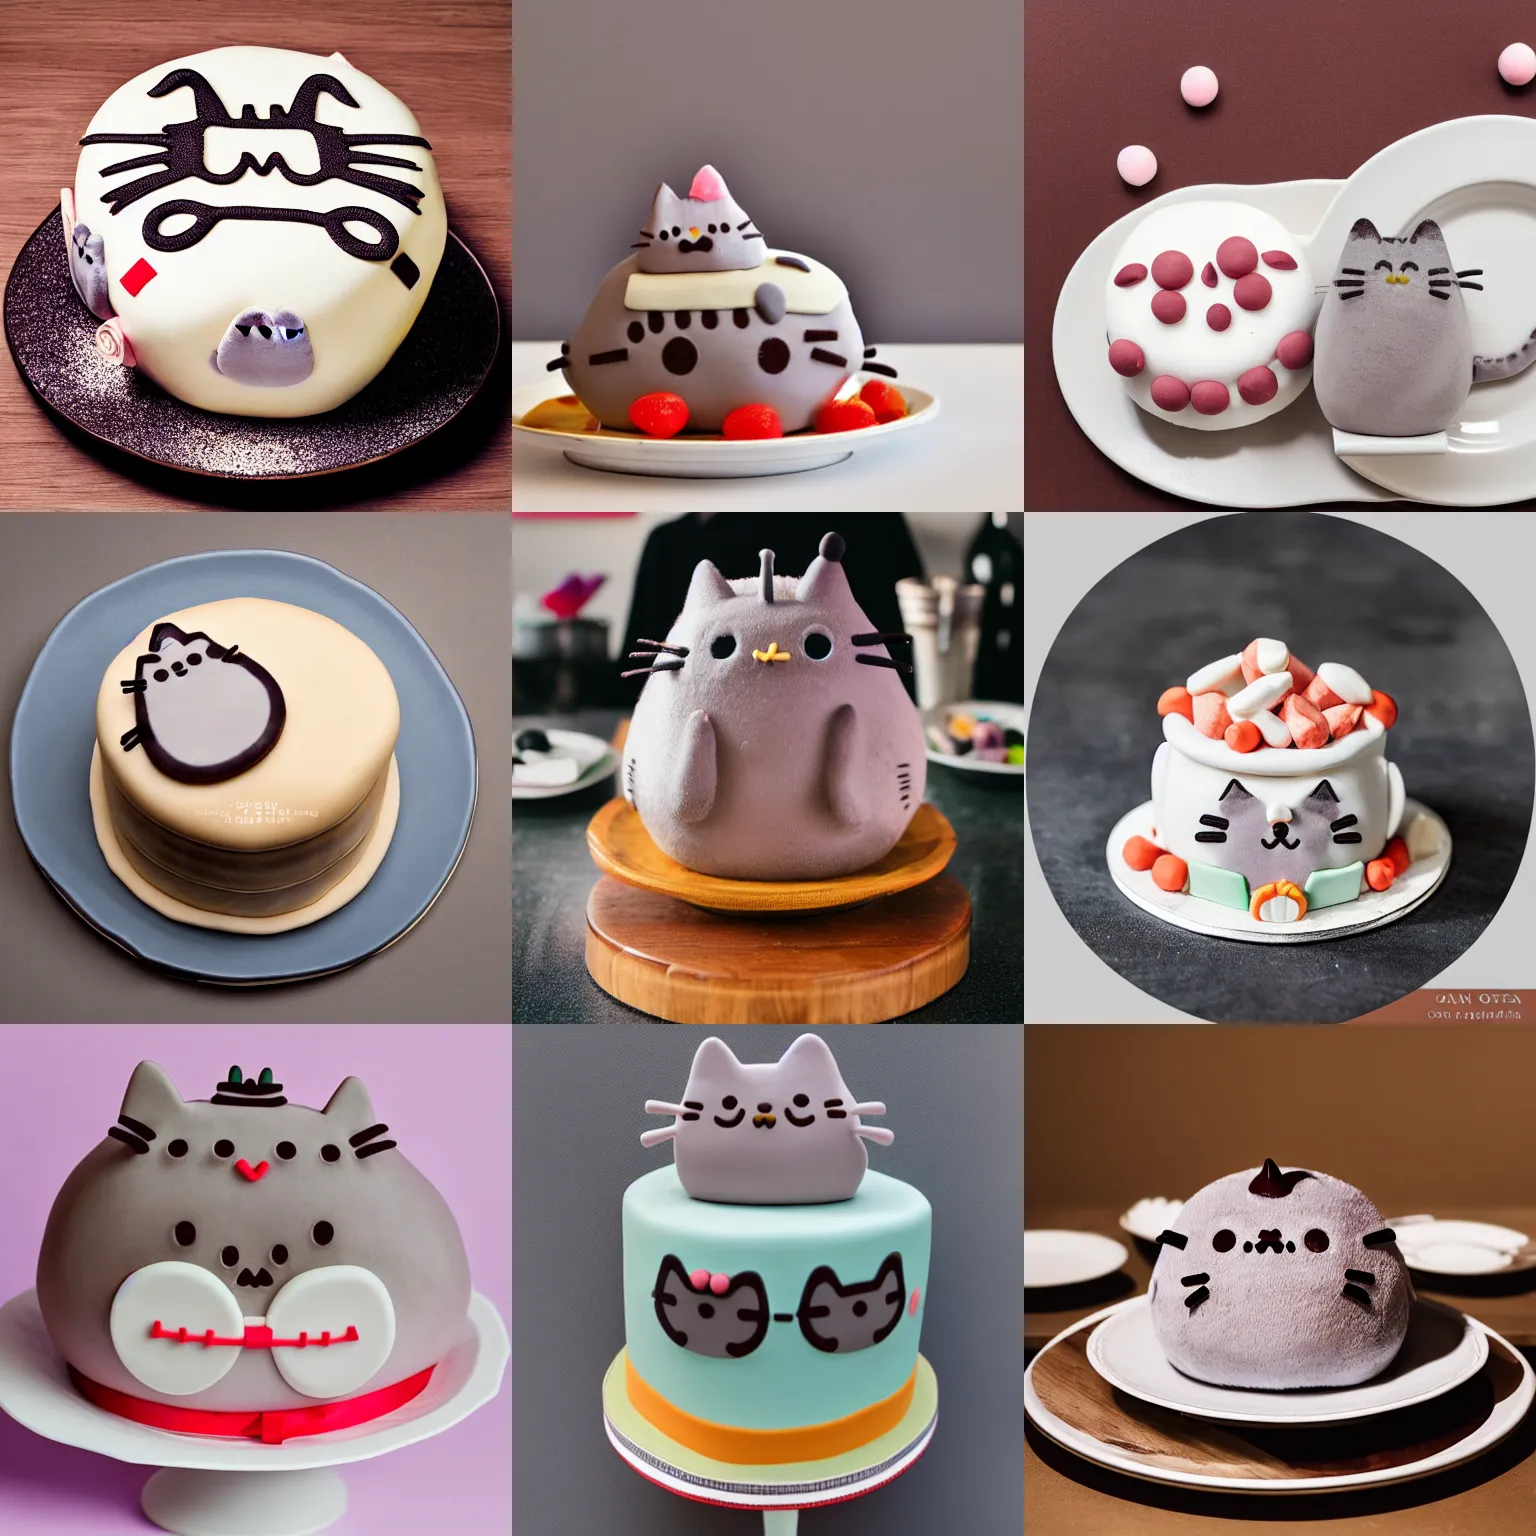 Prompt: A pusheen cake, professional food photography